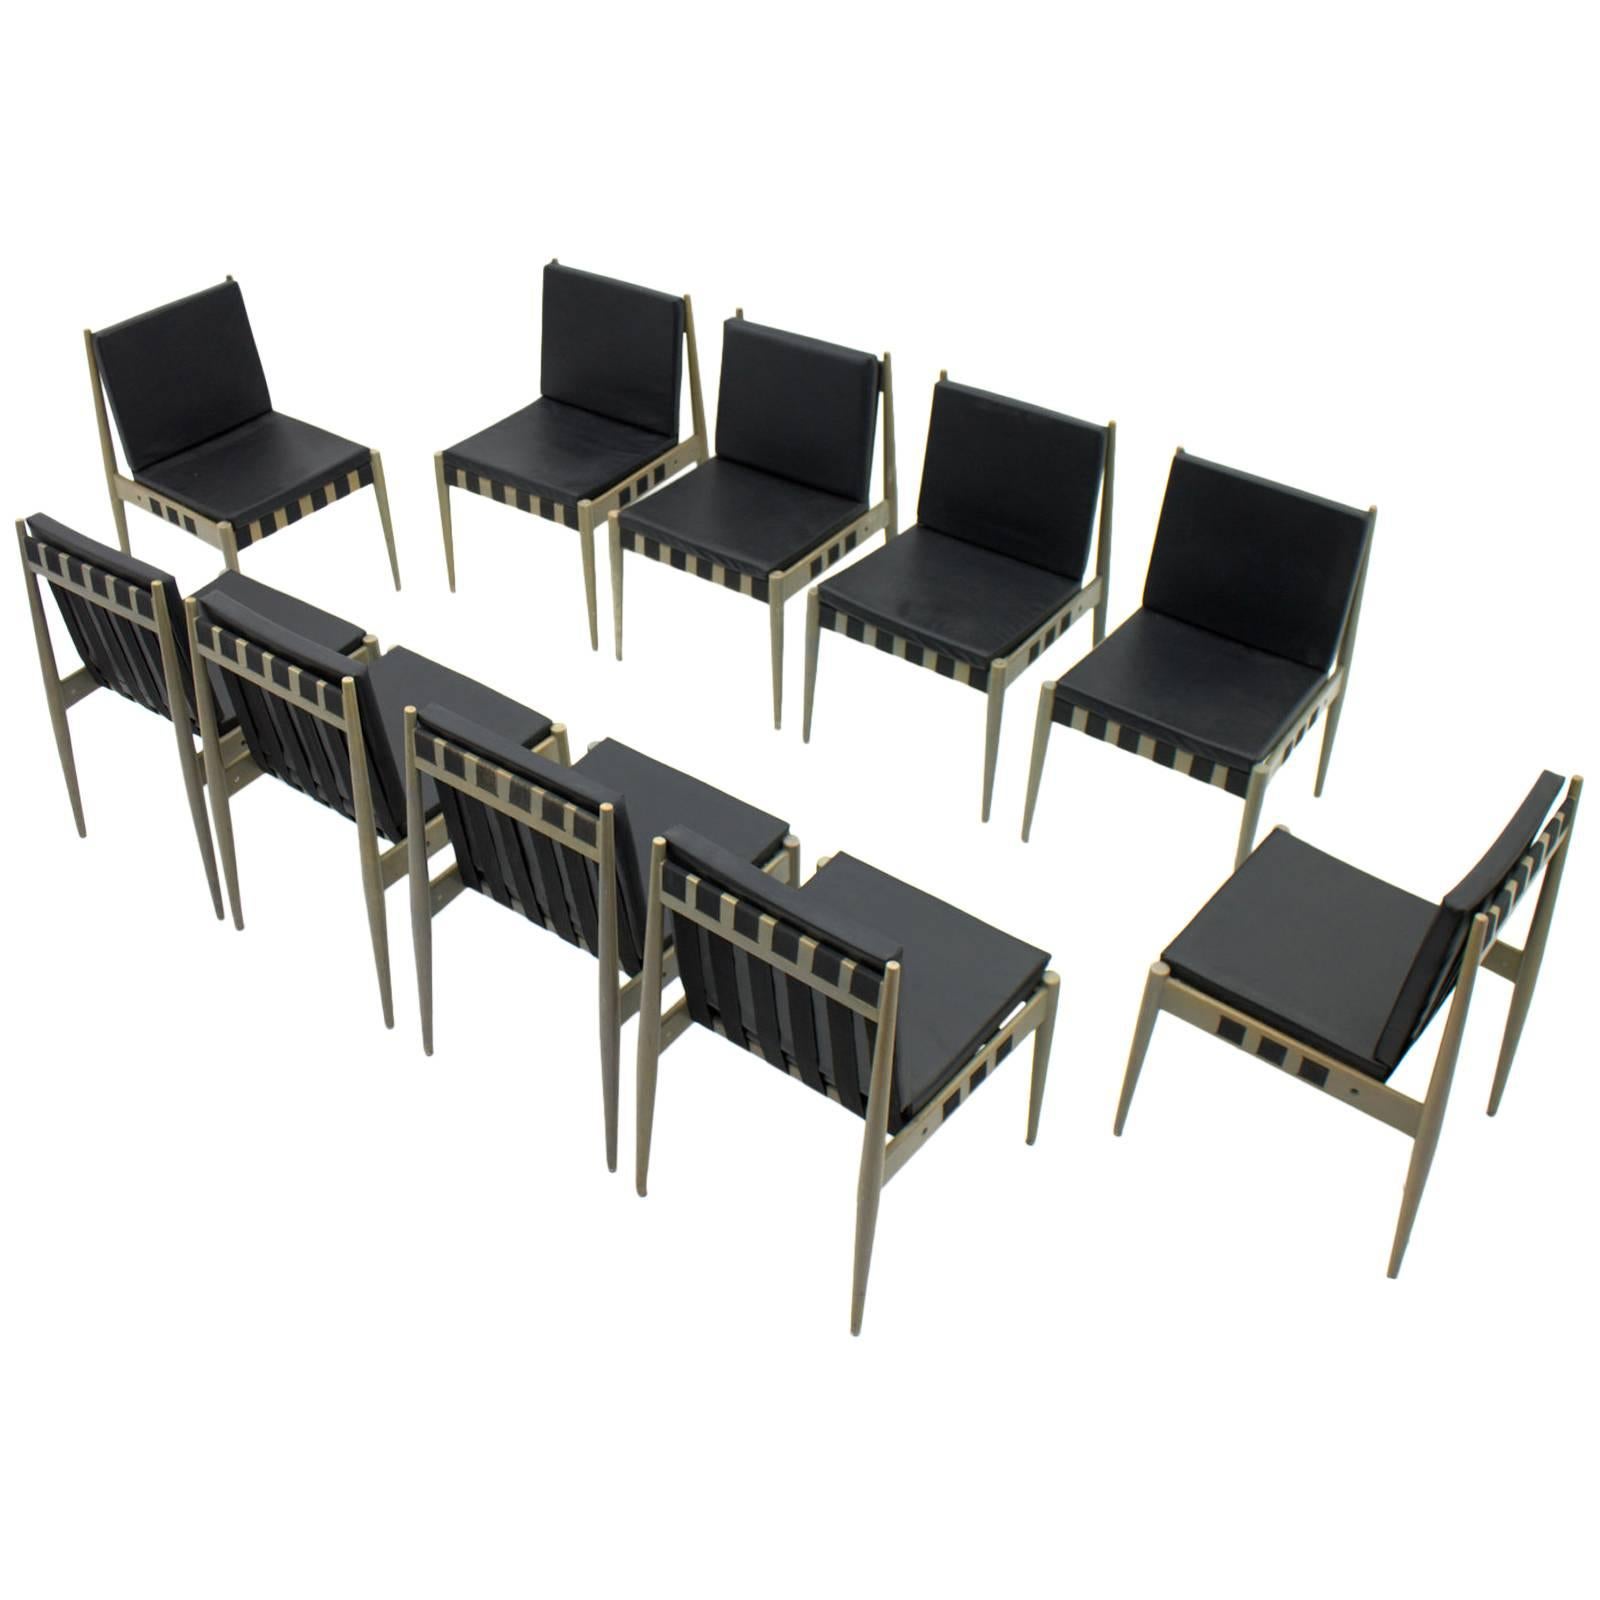 Set of Ten Architect Chairs by Egon Eiermann SE 121, Germany, 1964 For Sale